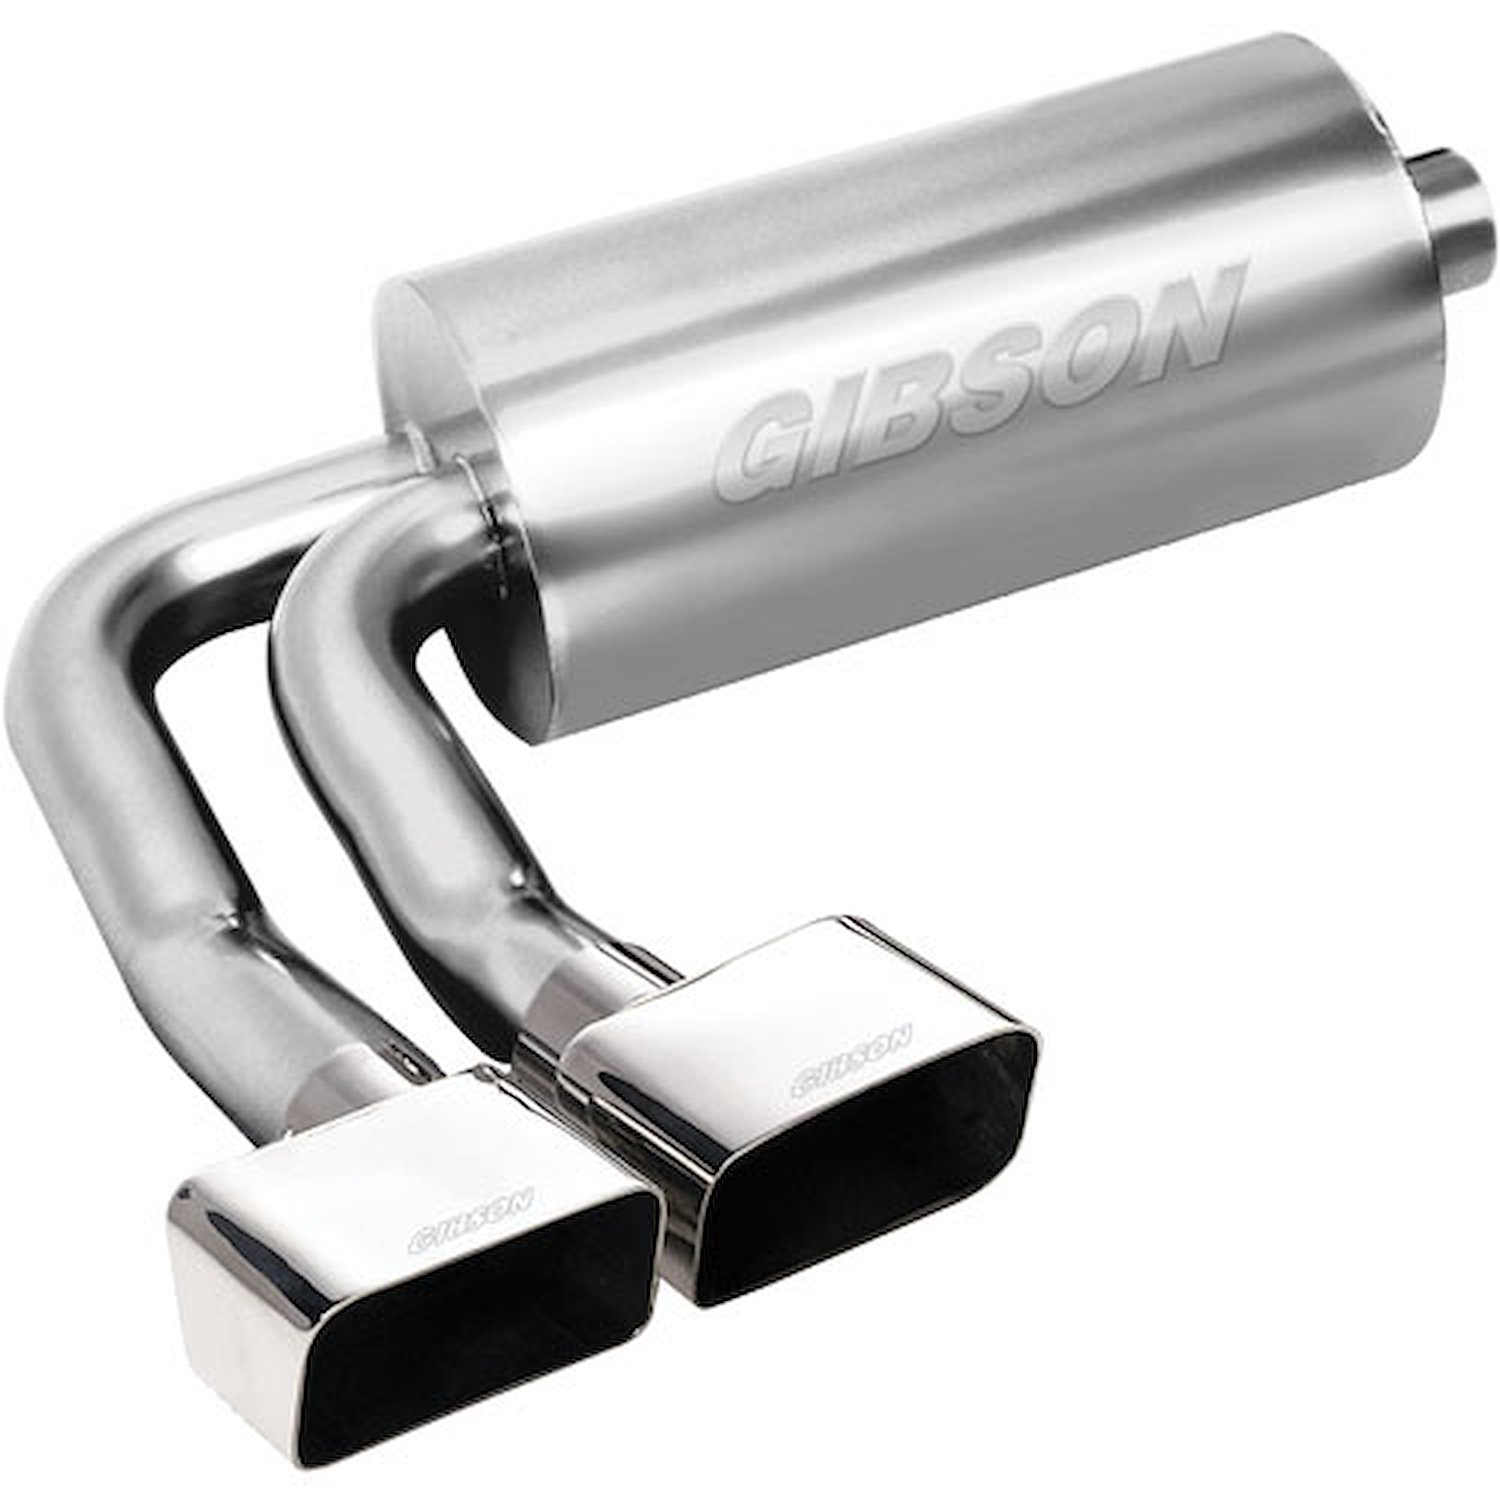 Super Truck Stainless Steel Cat-Back Exhaust 1998-2003 Ford F-150 4.2L/4.6L/5.4L